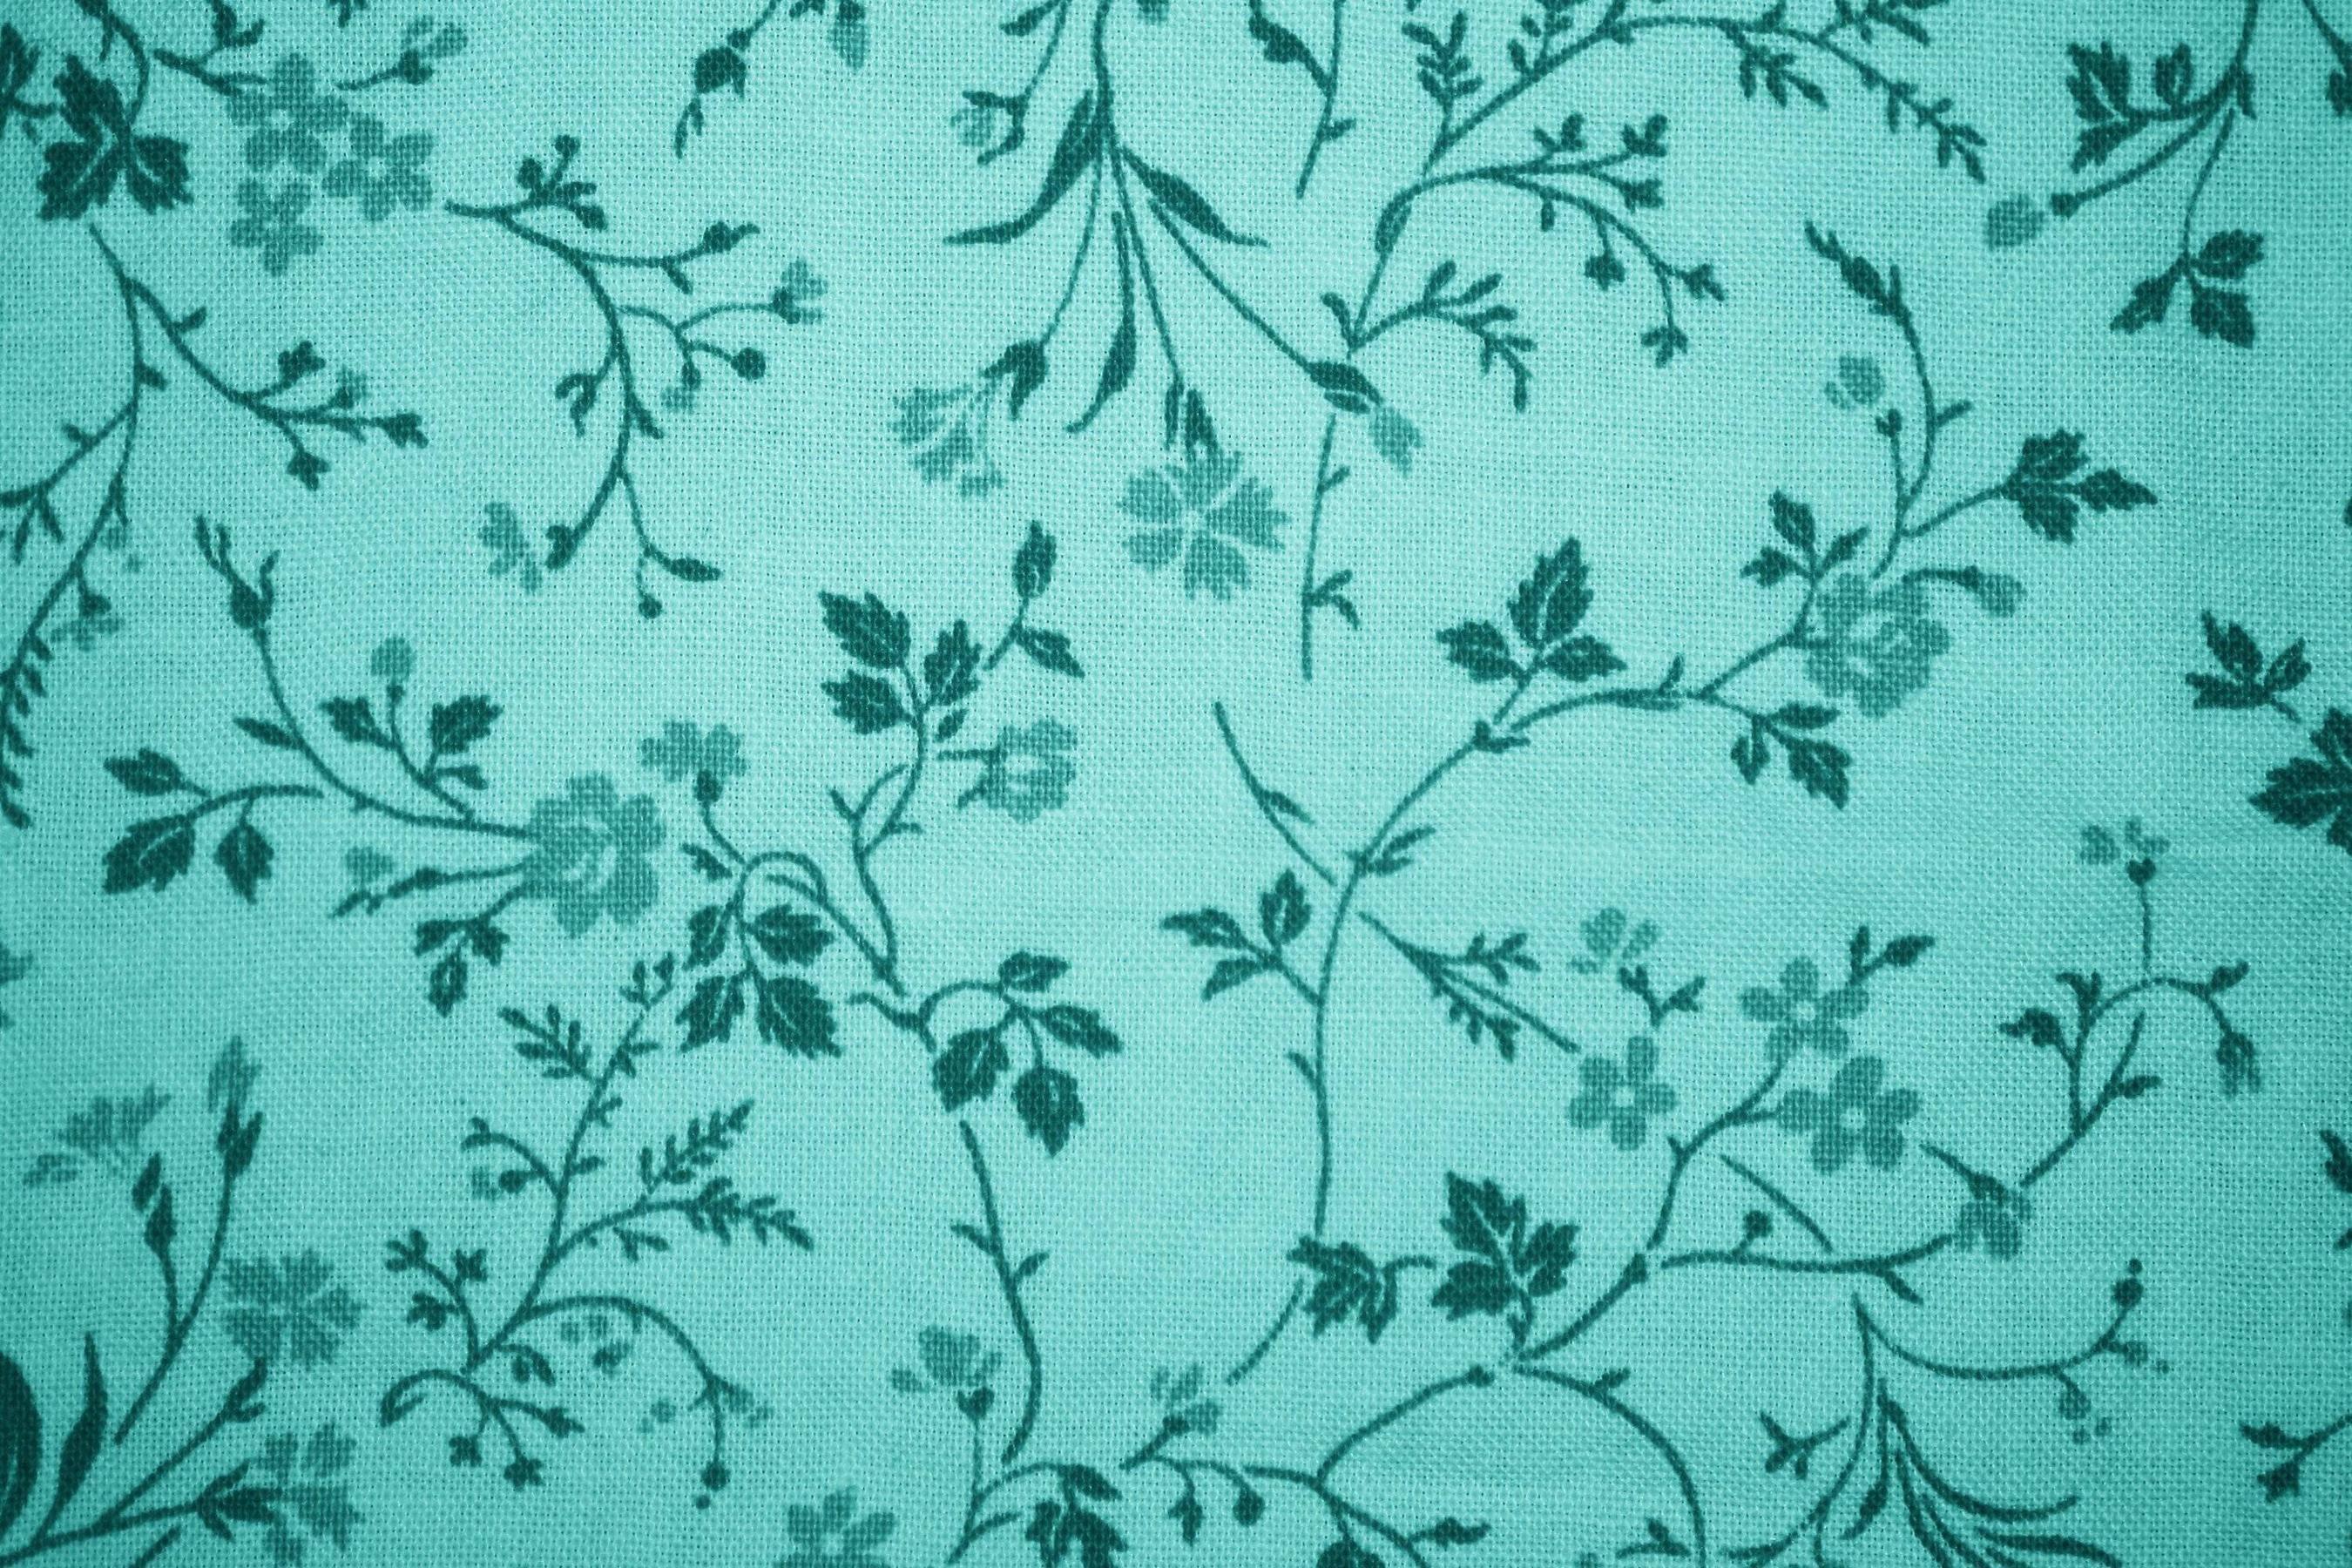 Teal Floral Print Fabric Texture Picture. Free Photograph